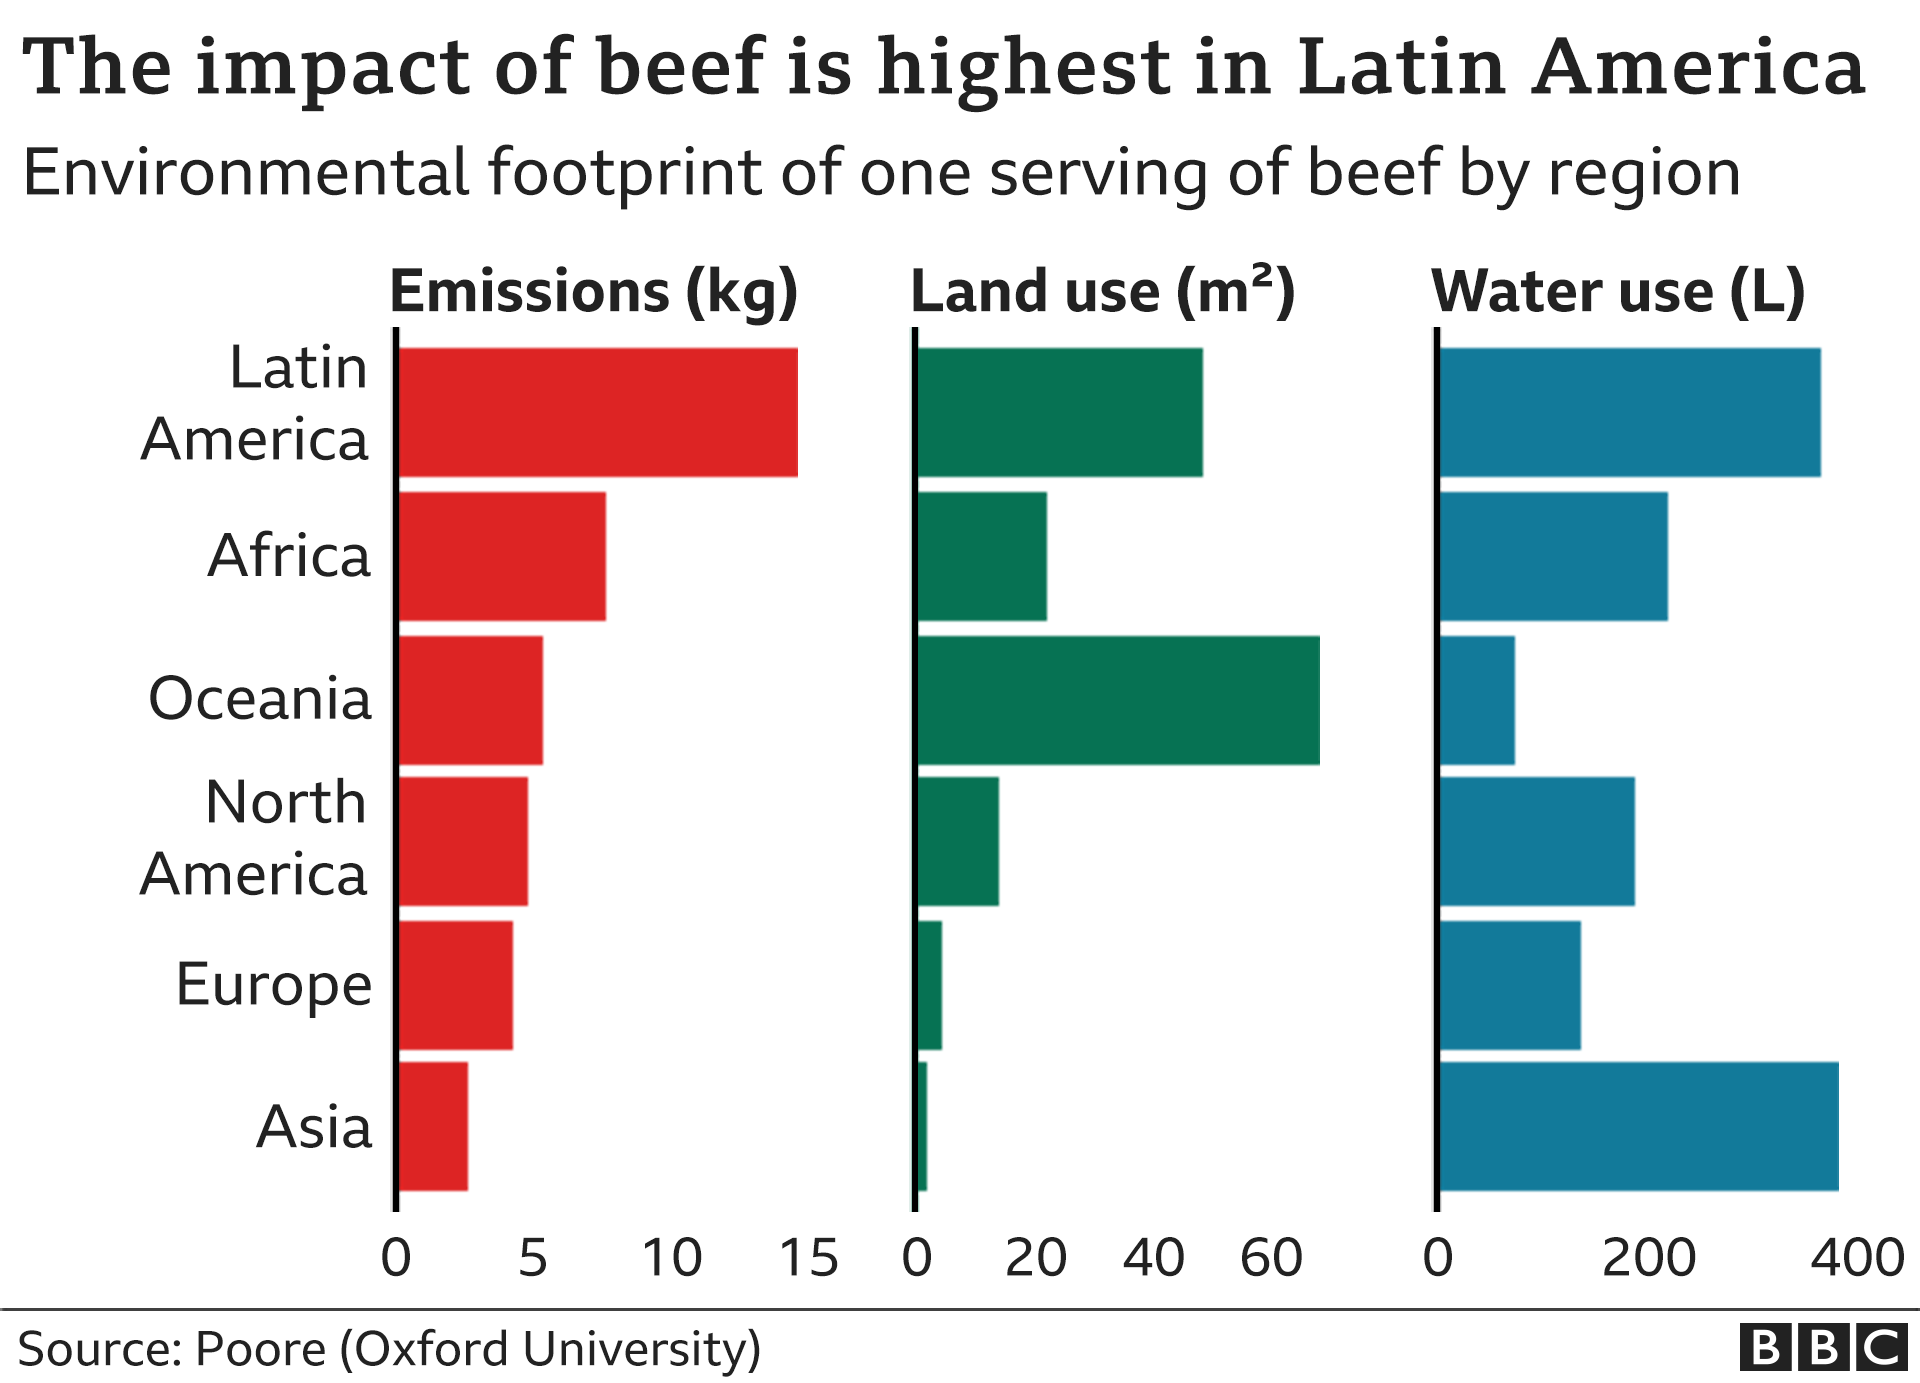 https://ichef.bbci.co.uk/news/640/cpsprodpb/82BA/production/_121266433_beef_by_region_ws_640x3-nc.png